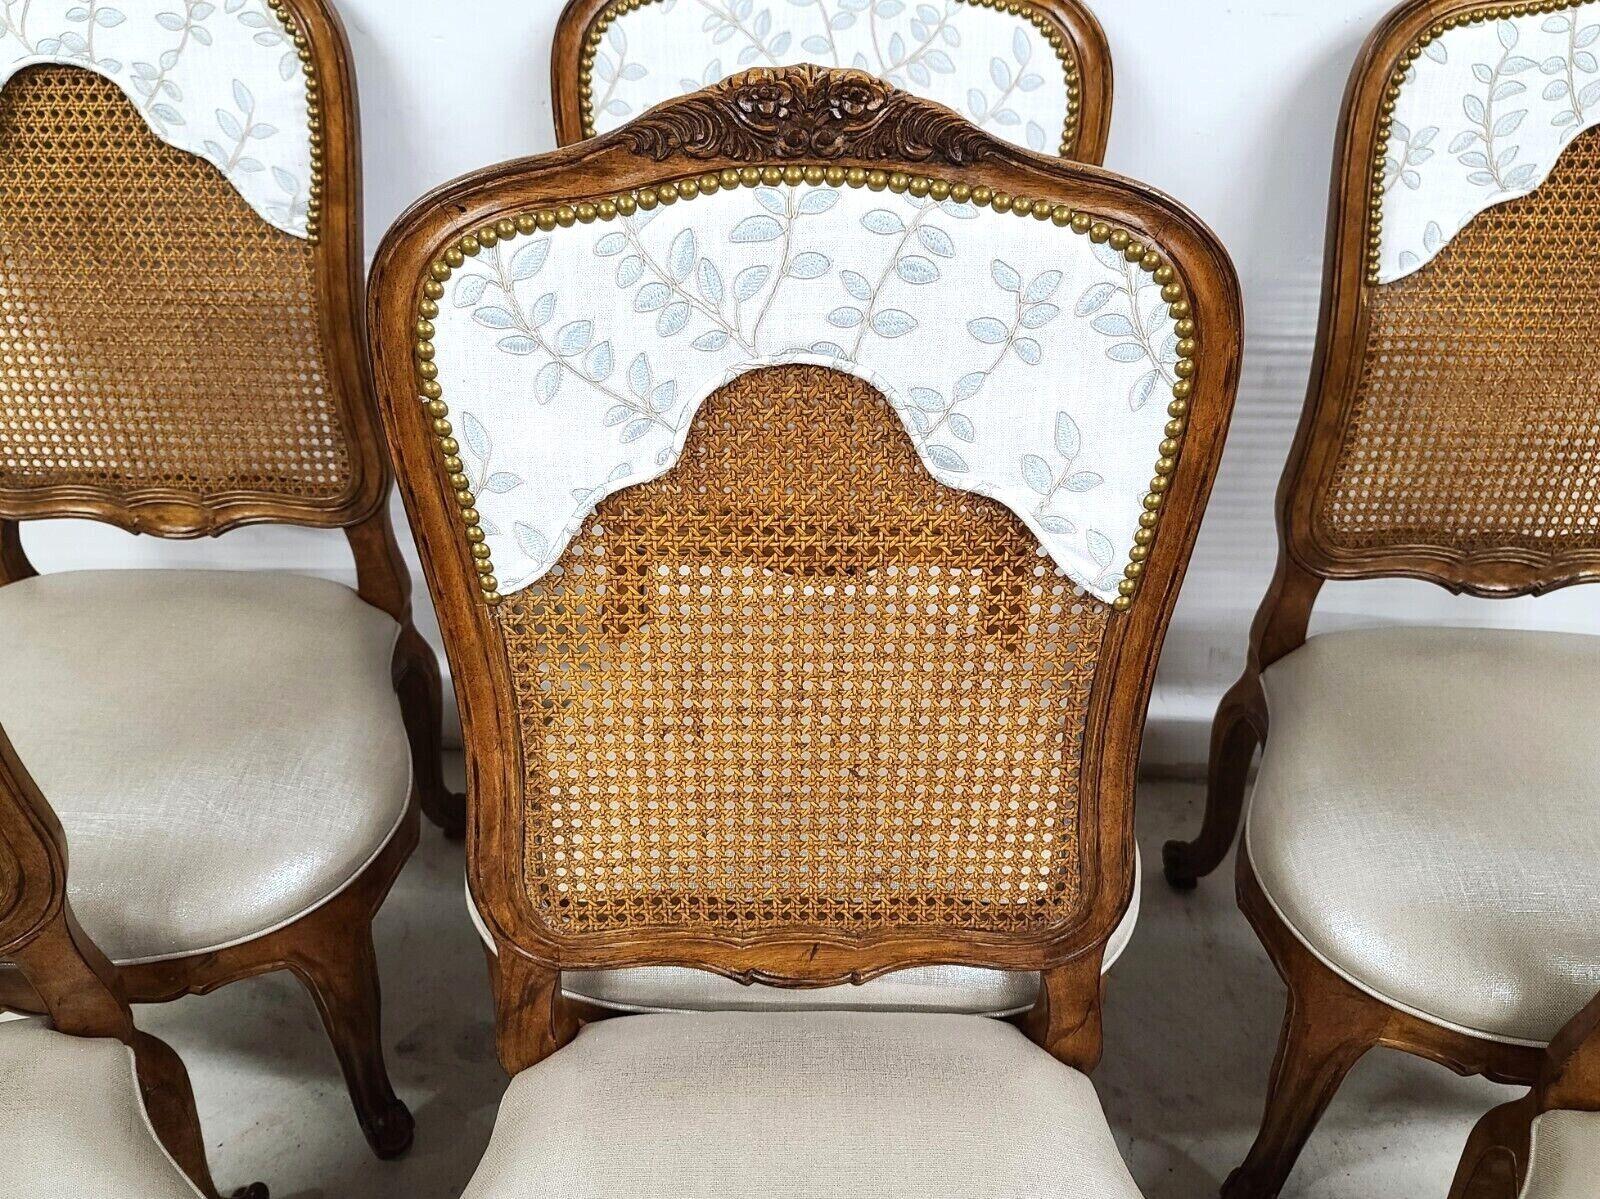 For FULL item description click on CONTINUE READING at the bottom of this page.

Offering One Of Our Recent Palm Beach Estate Fine Furniture Acquisitions Of A
Set of (6) French Provincial Cane Back Dining Chairs by CENTURY FURNITURE
Seats are